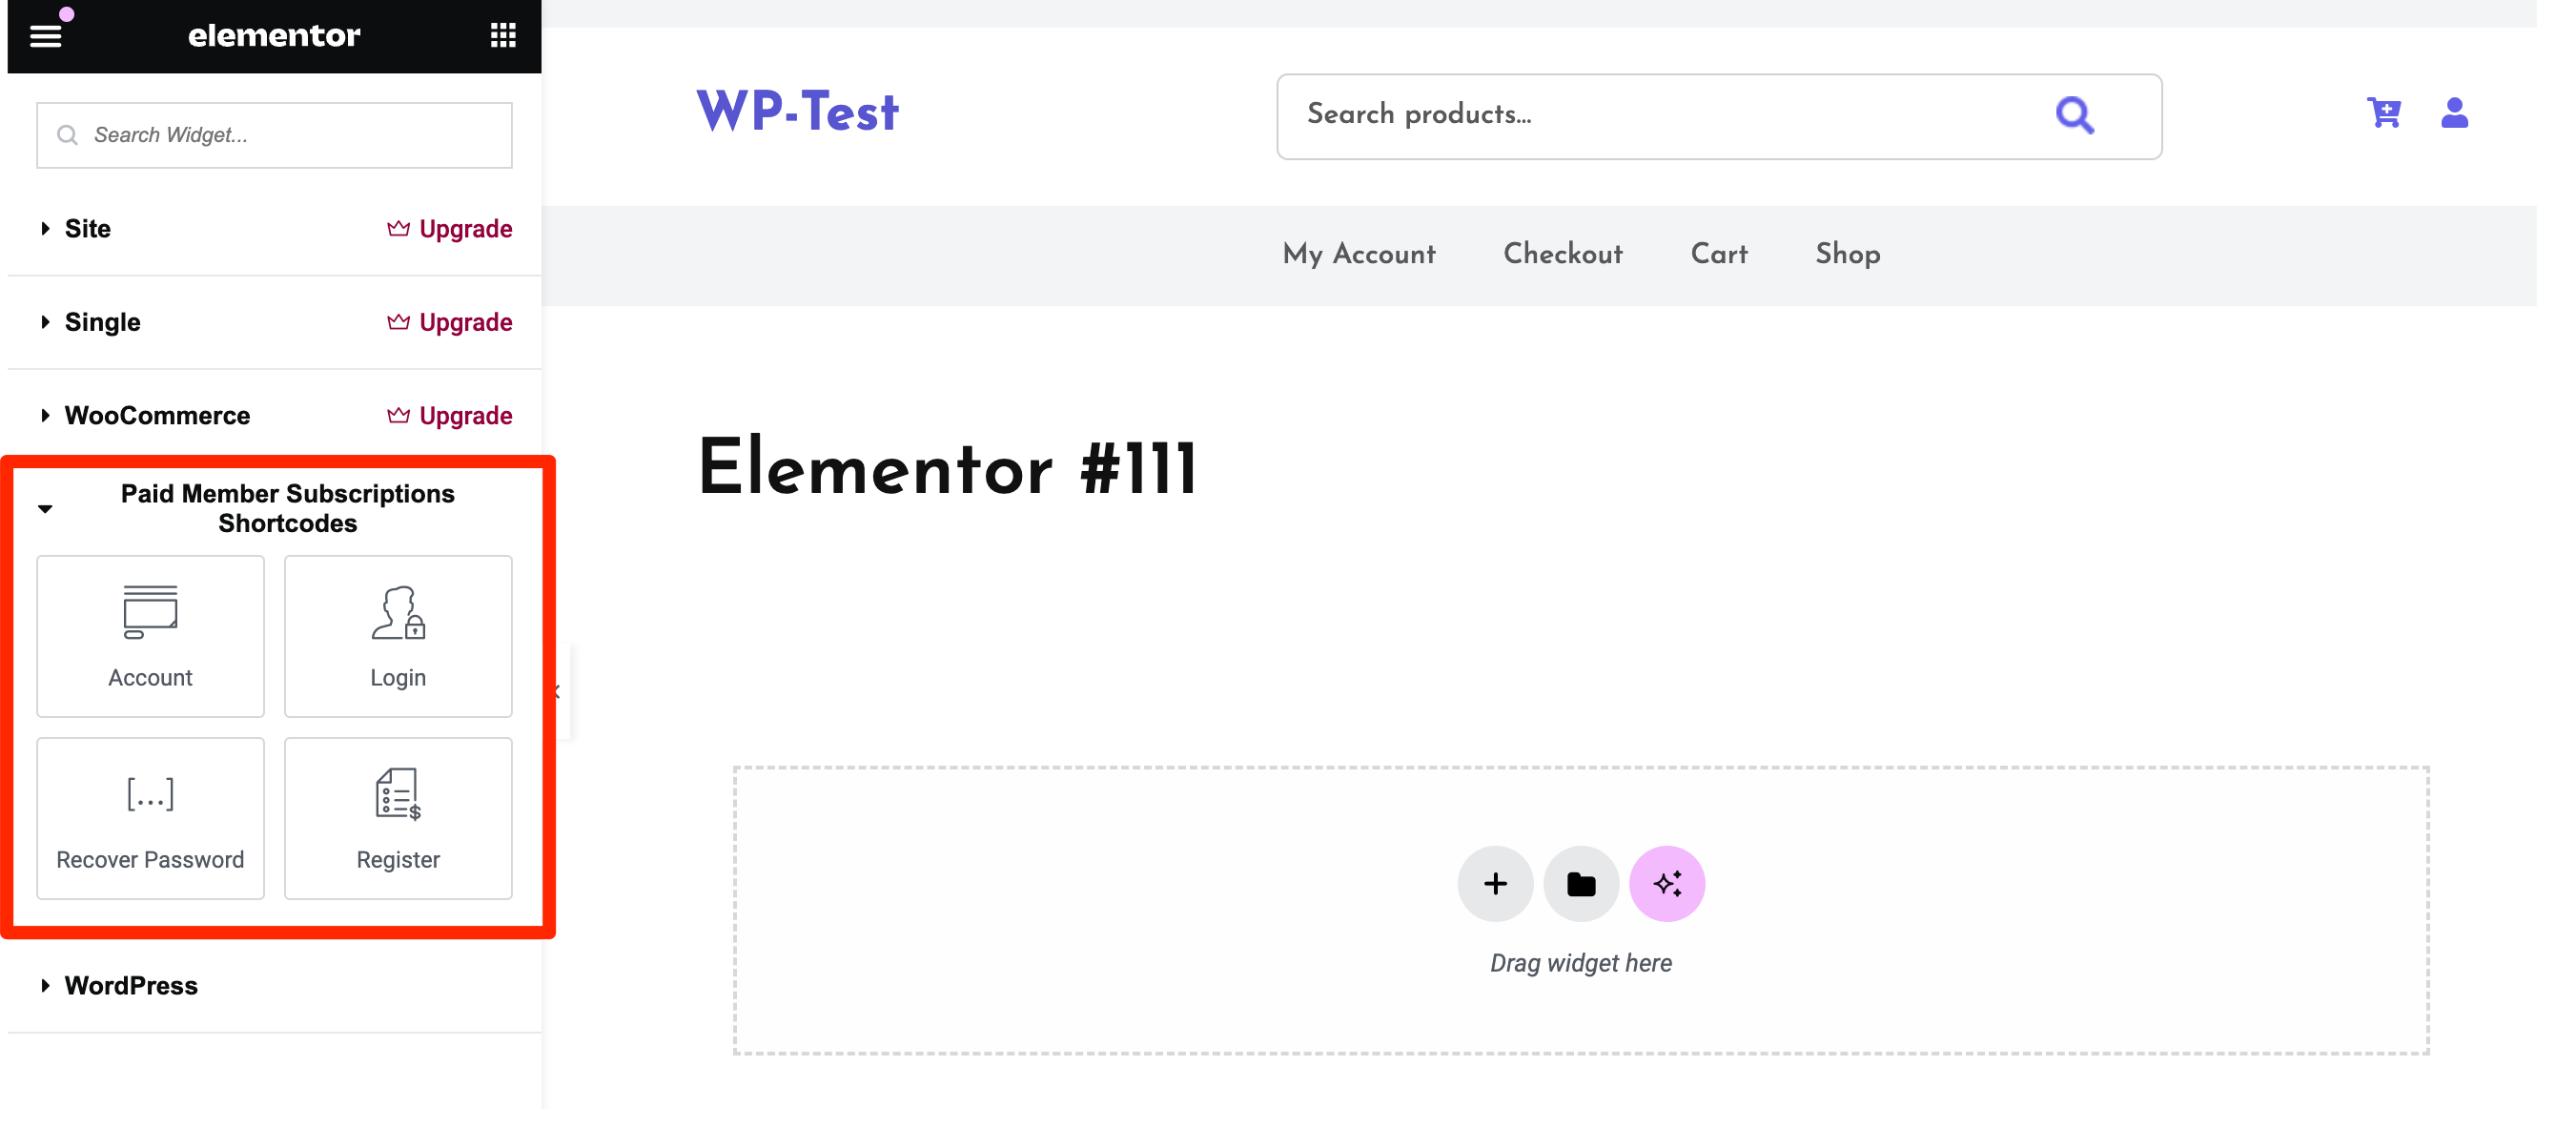 Paid Member Subscriptions register login forms in Elementor